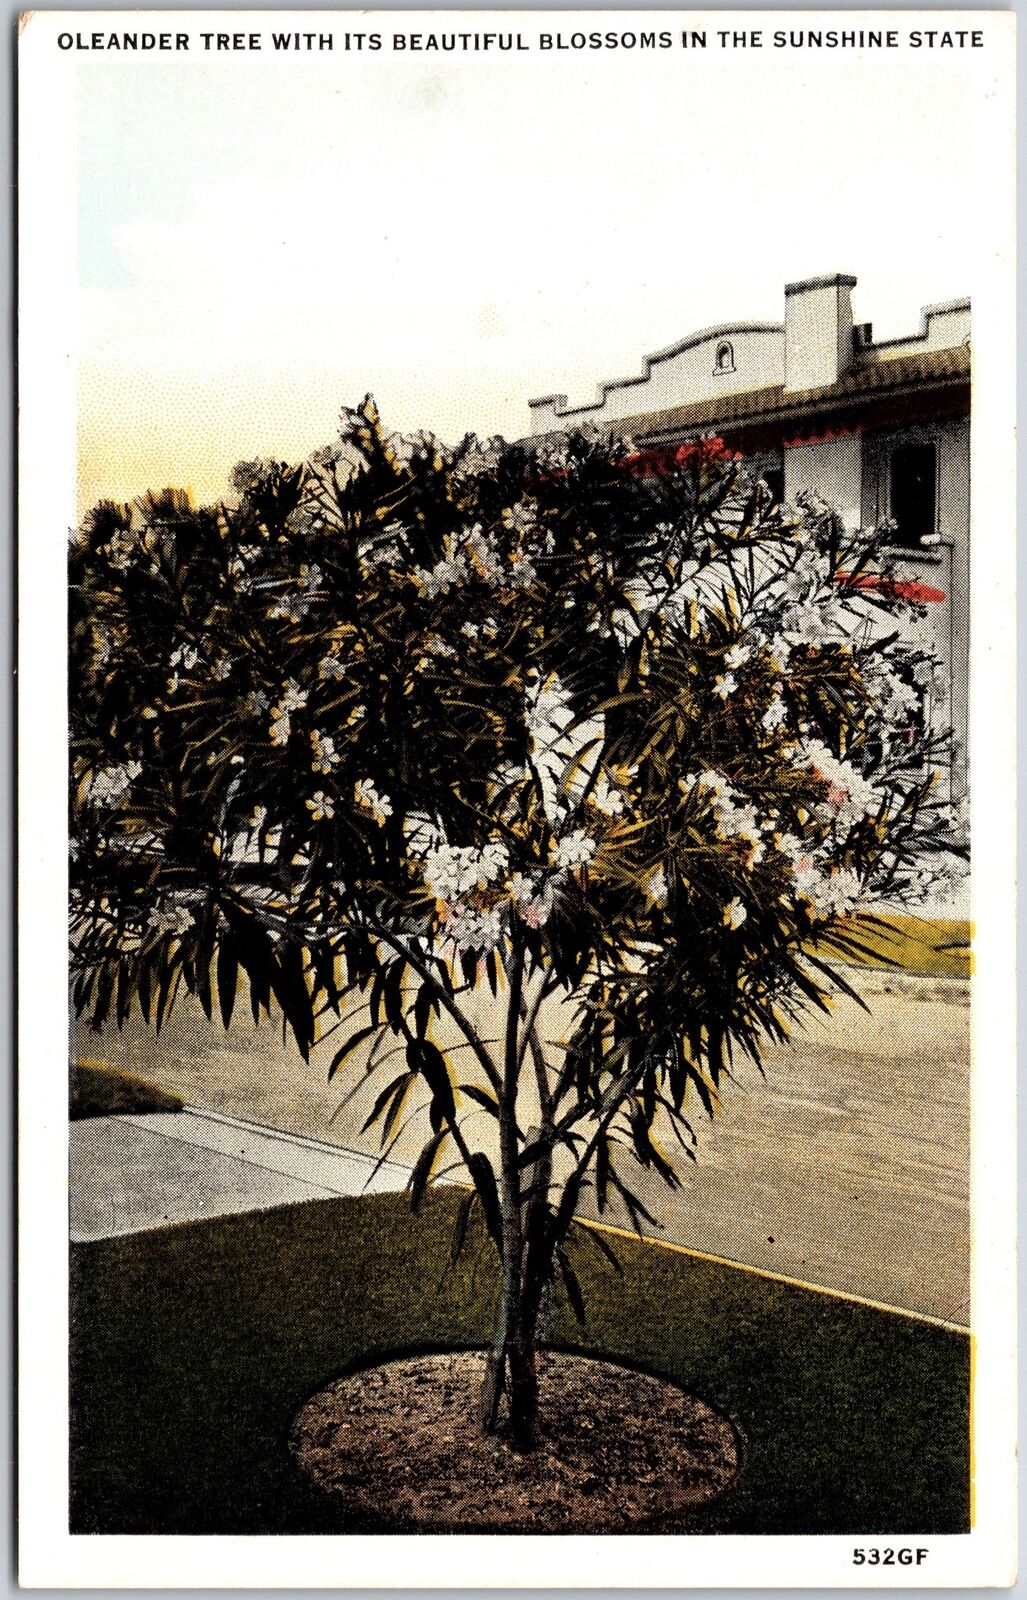 Oleander Tree with its Beautiful Blossoms in the Sunshine State Florida Postcard